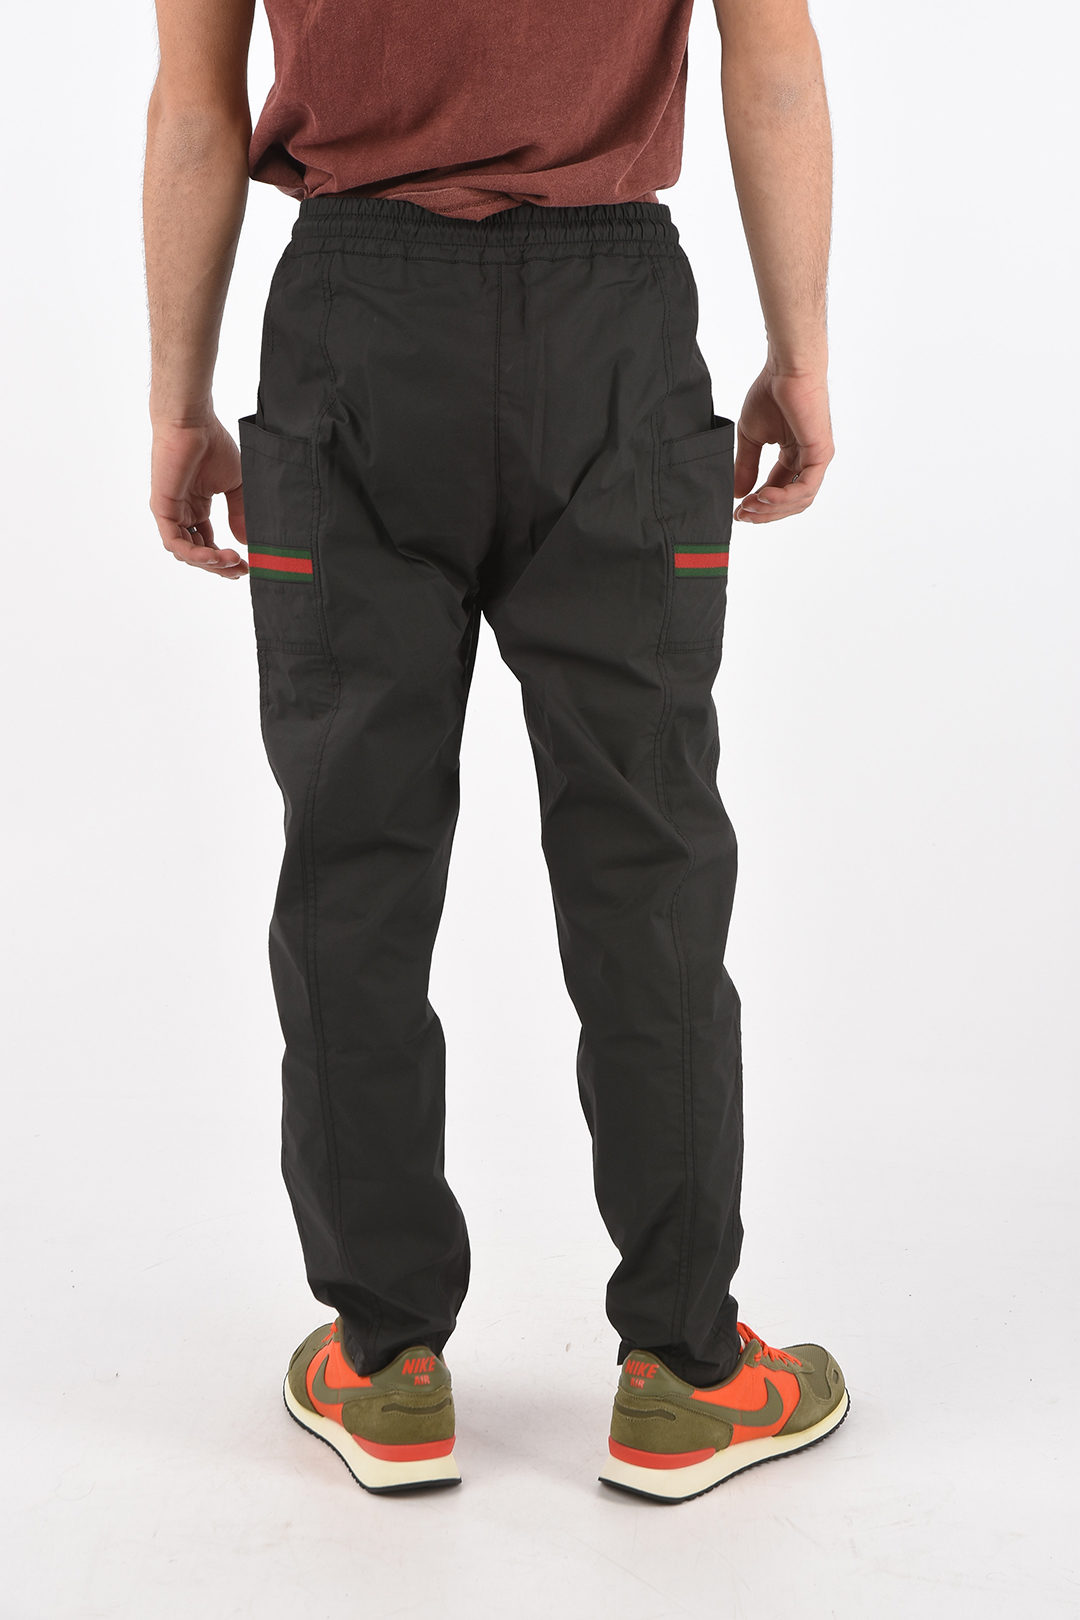 Gucci Cargo Pants W/worldwide Patch in Black for Men